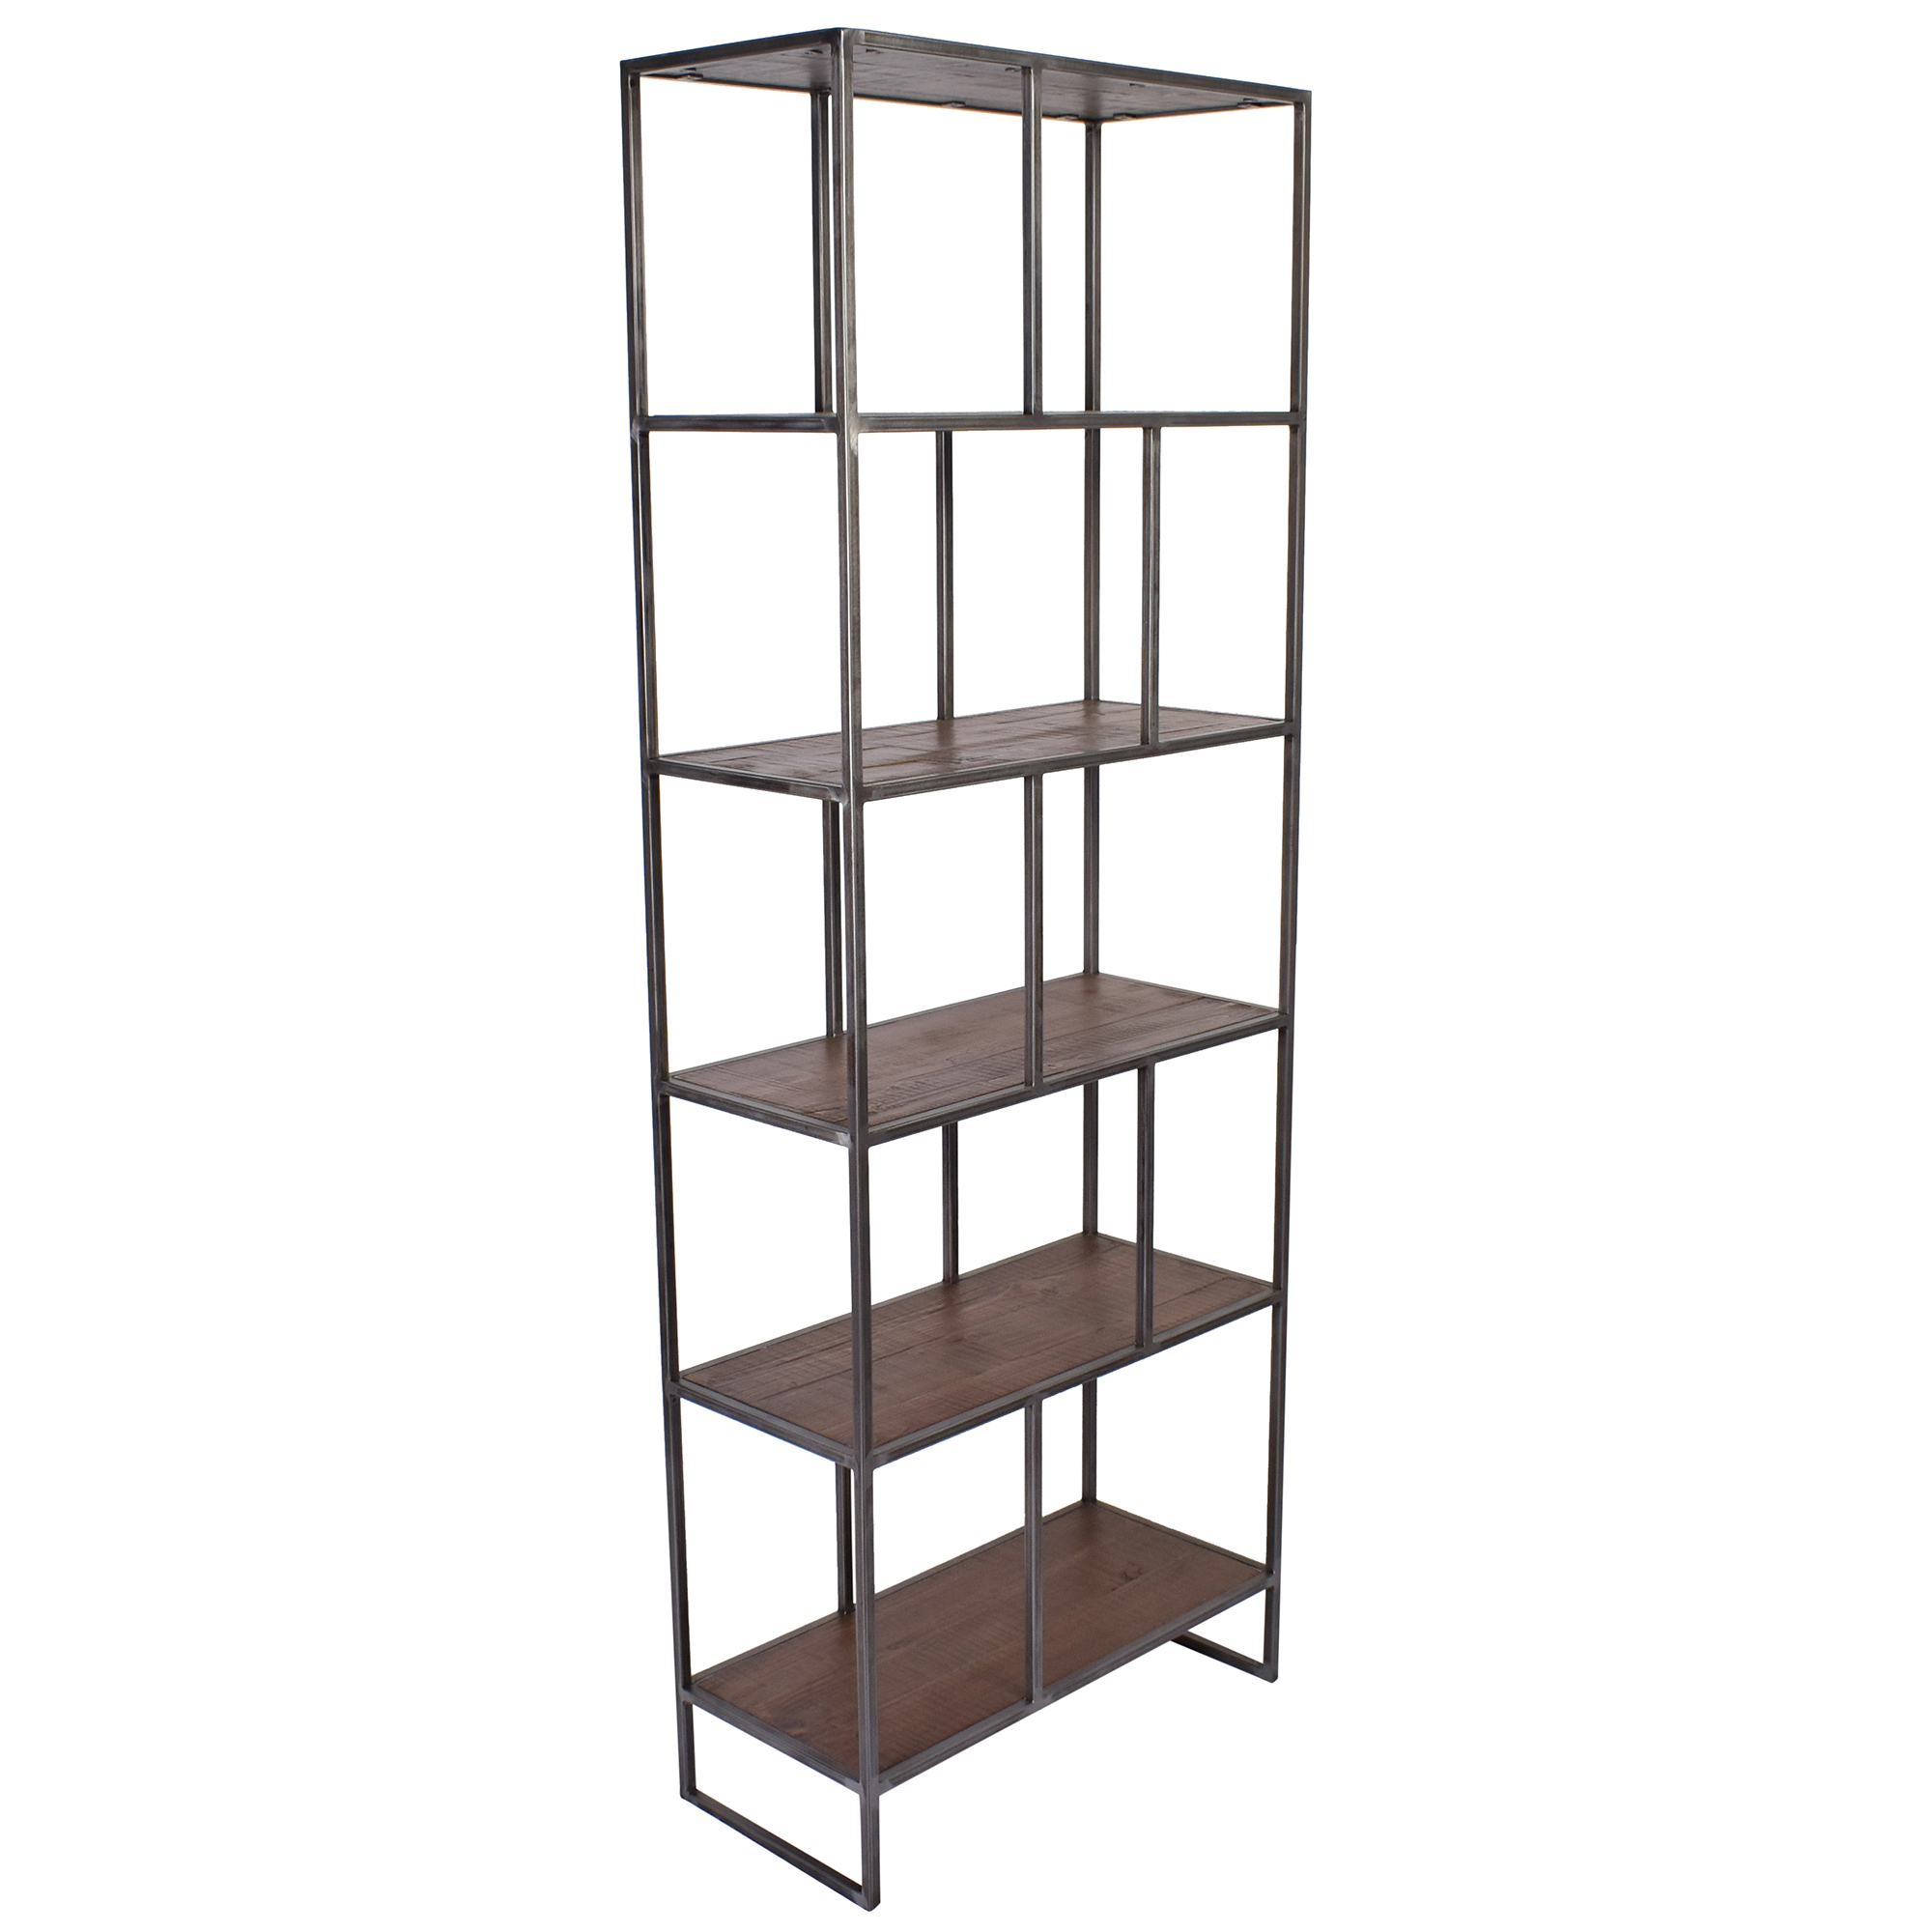 Chartwell Home Karenna 6 Tier Reclaimed, Reclaimed Shelving Units